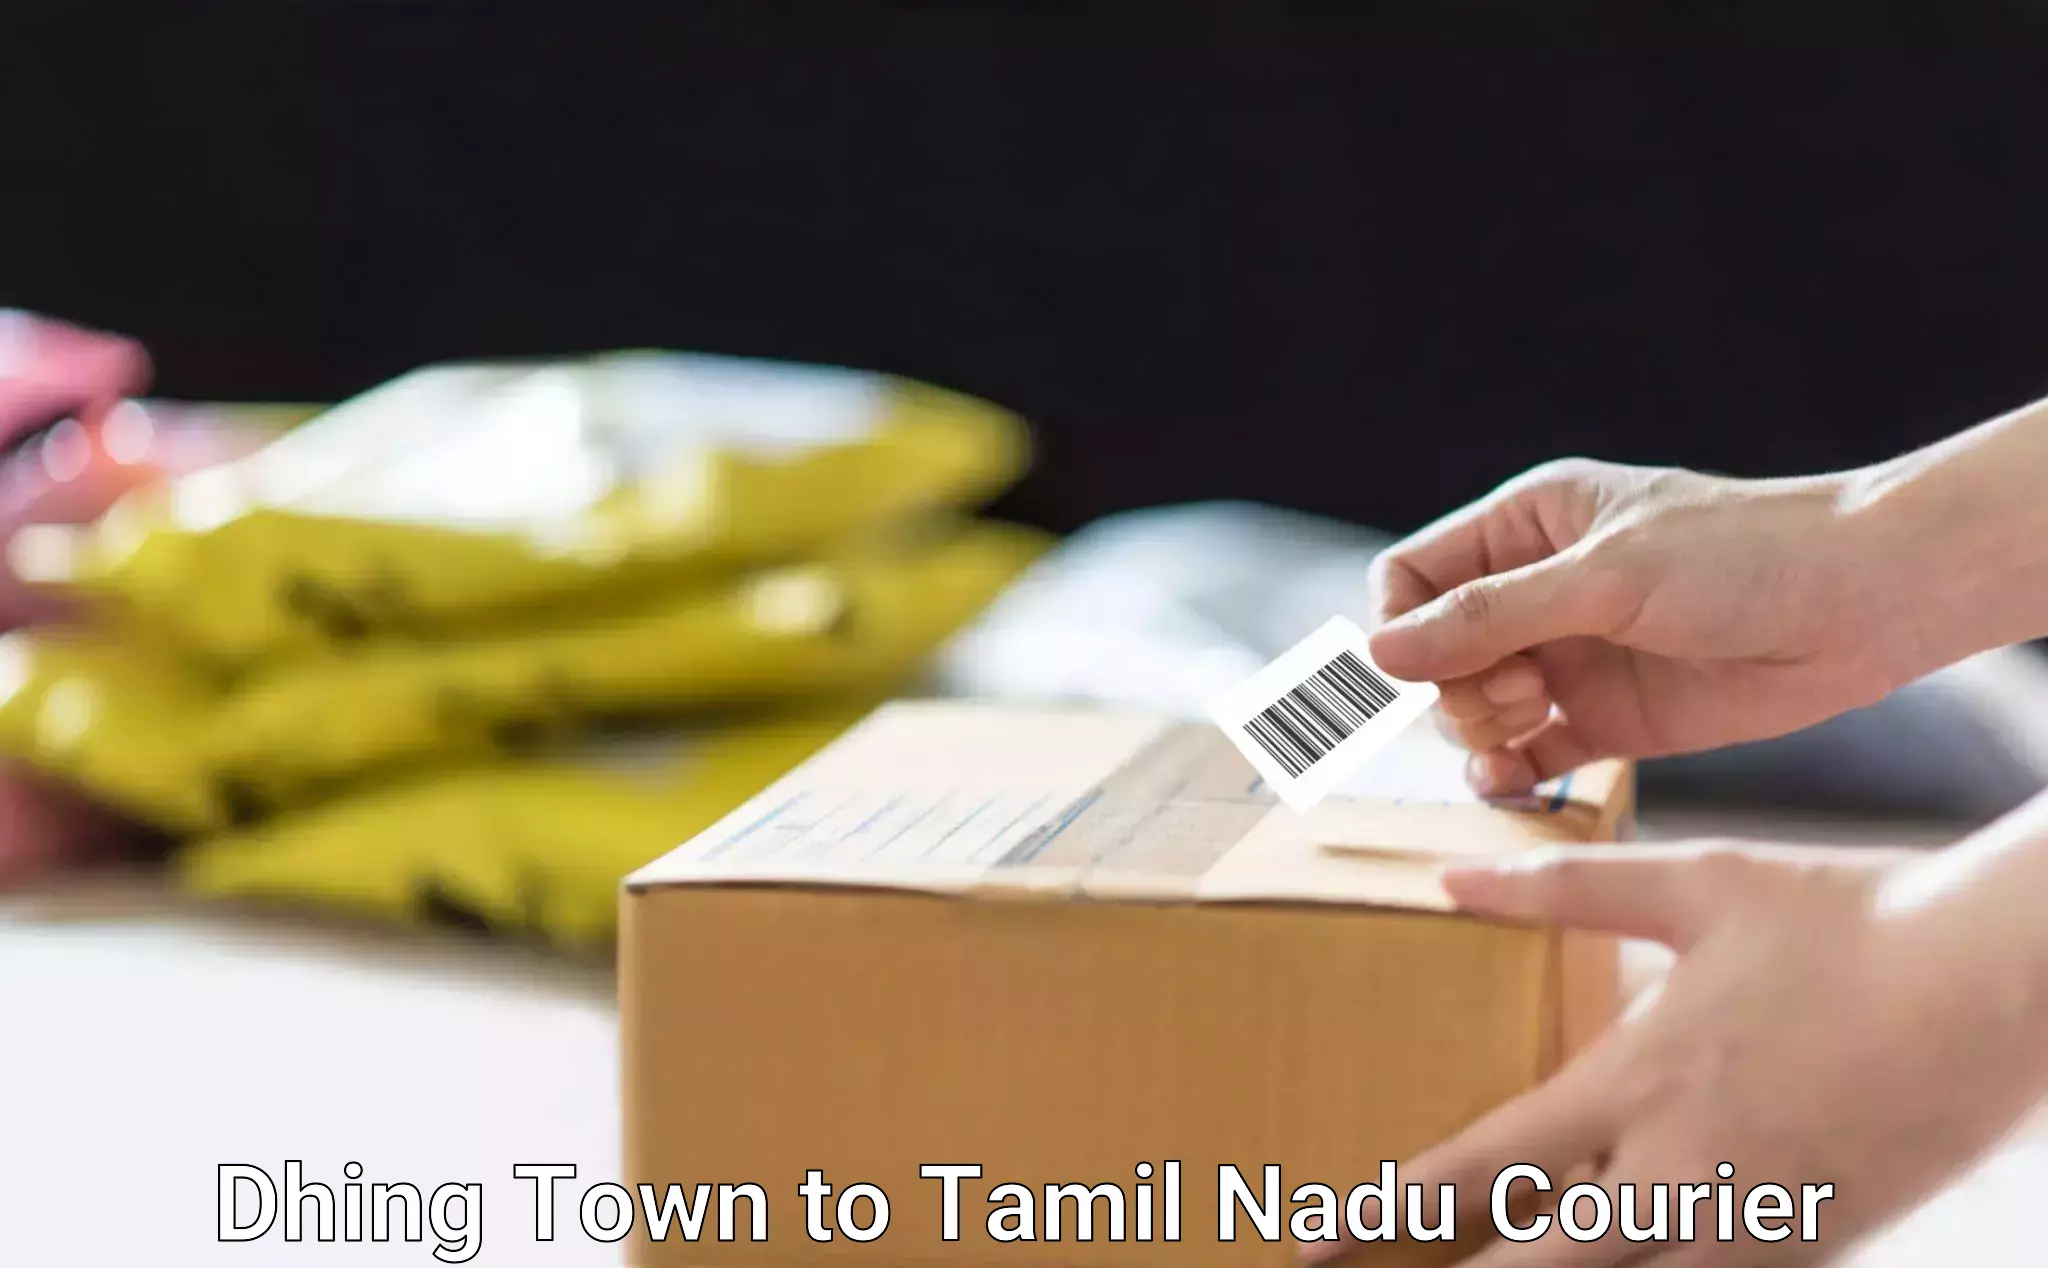 Nationwide delivery network Dhing Town to Tamil Nadu